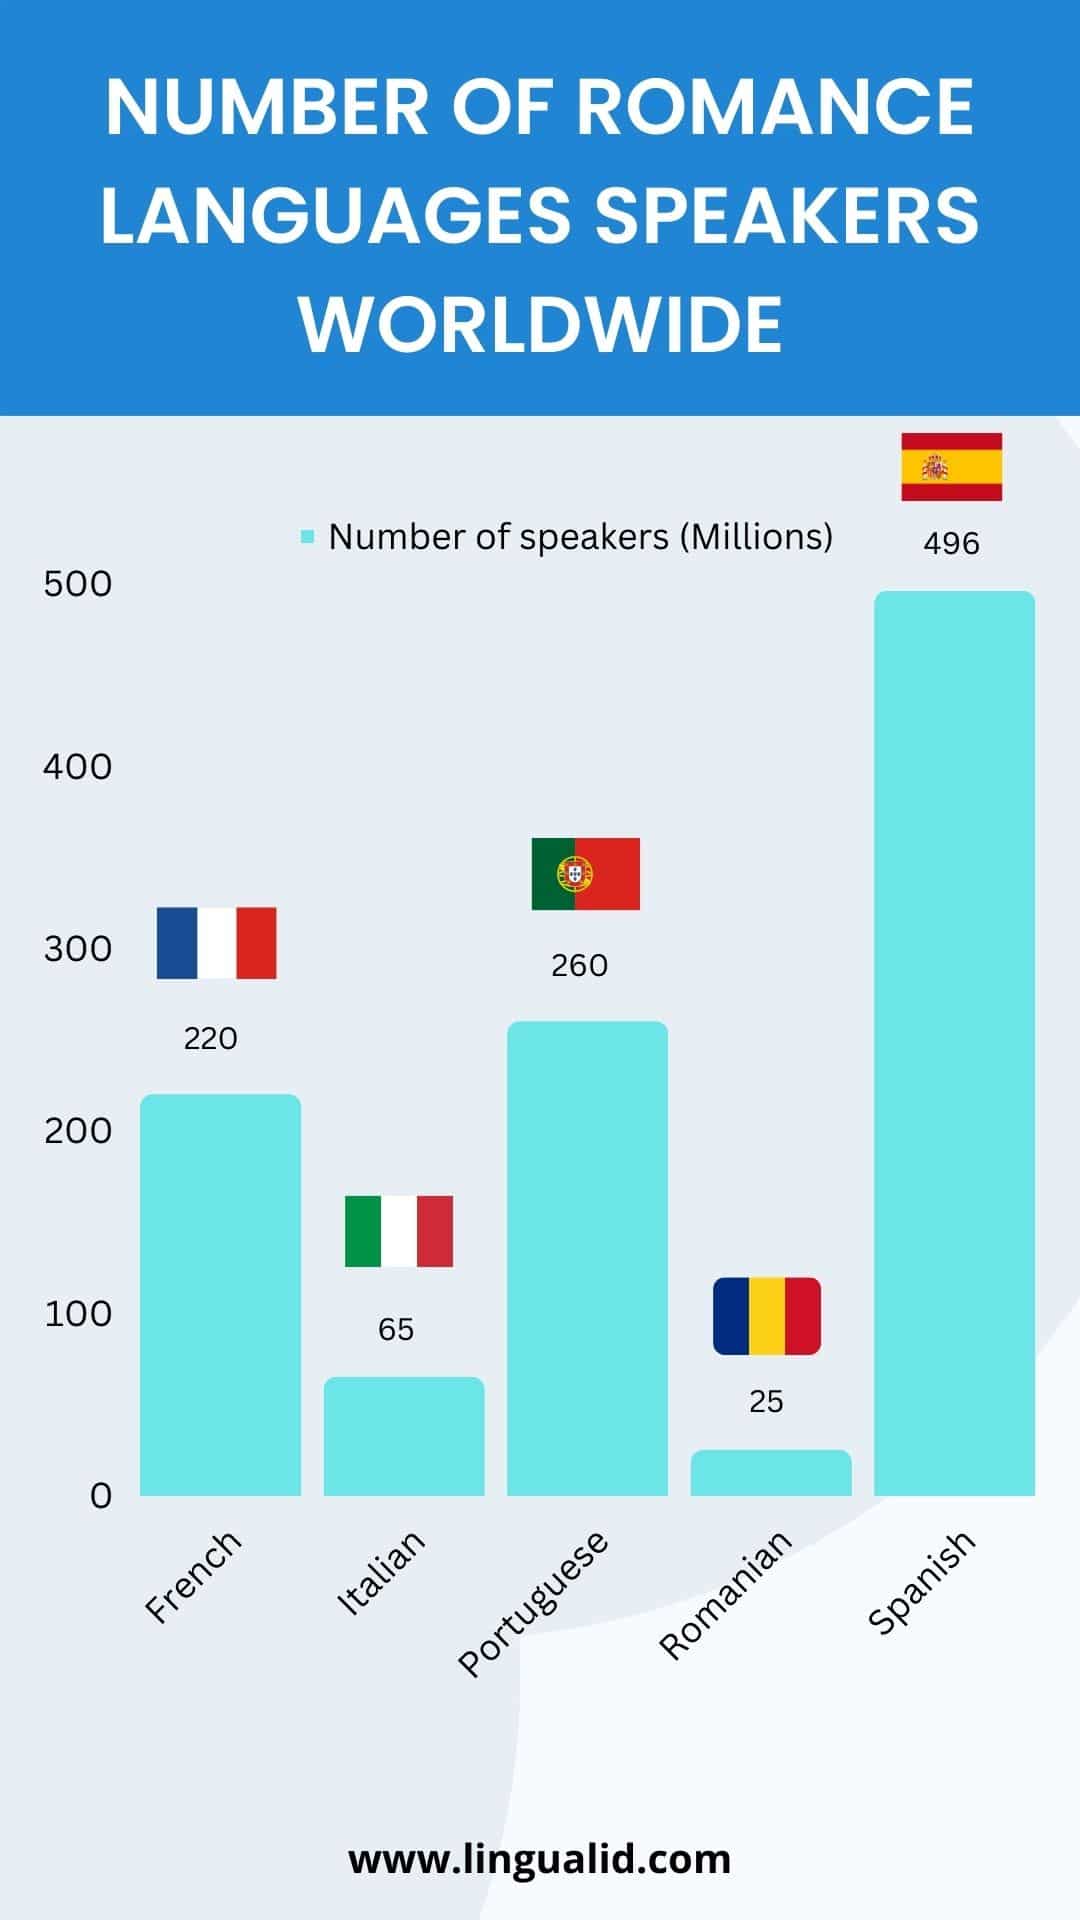 Number of romance languages speakers worldwide